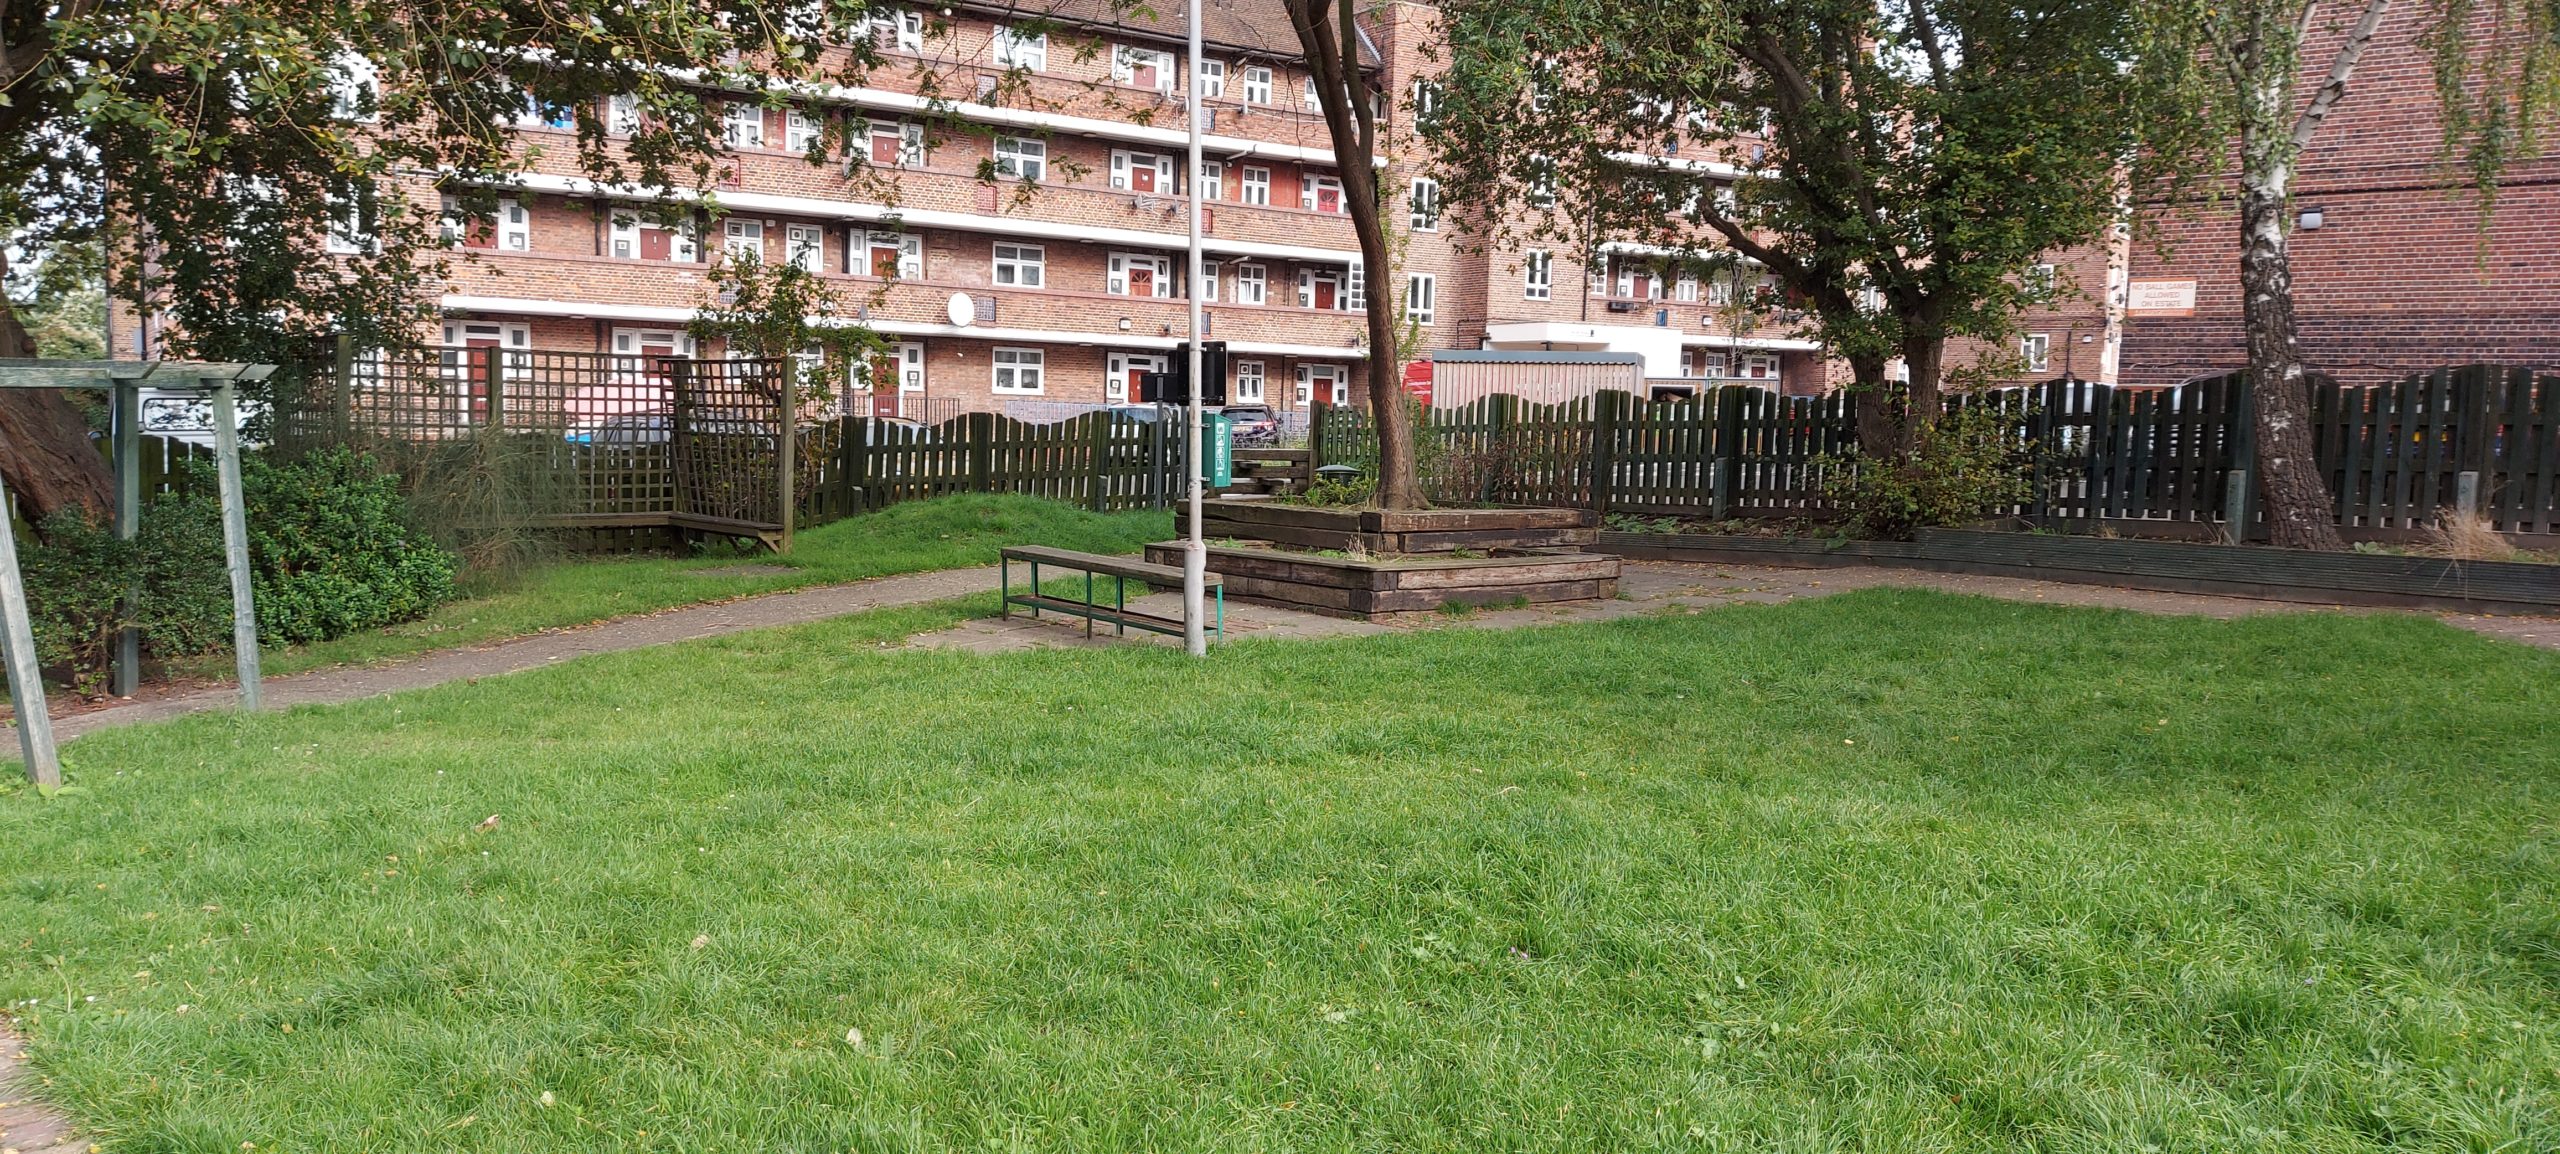 Lambeth: Letting our estate grasses grow for the environment